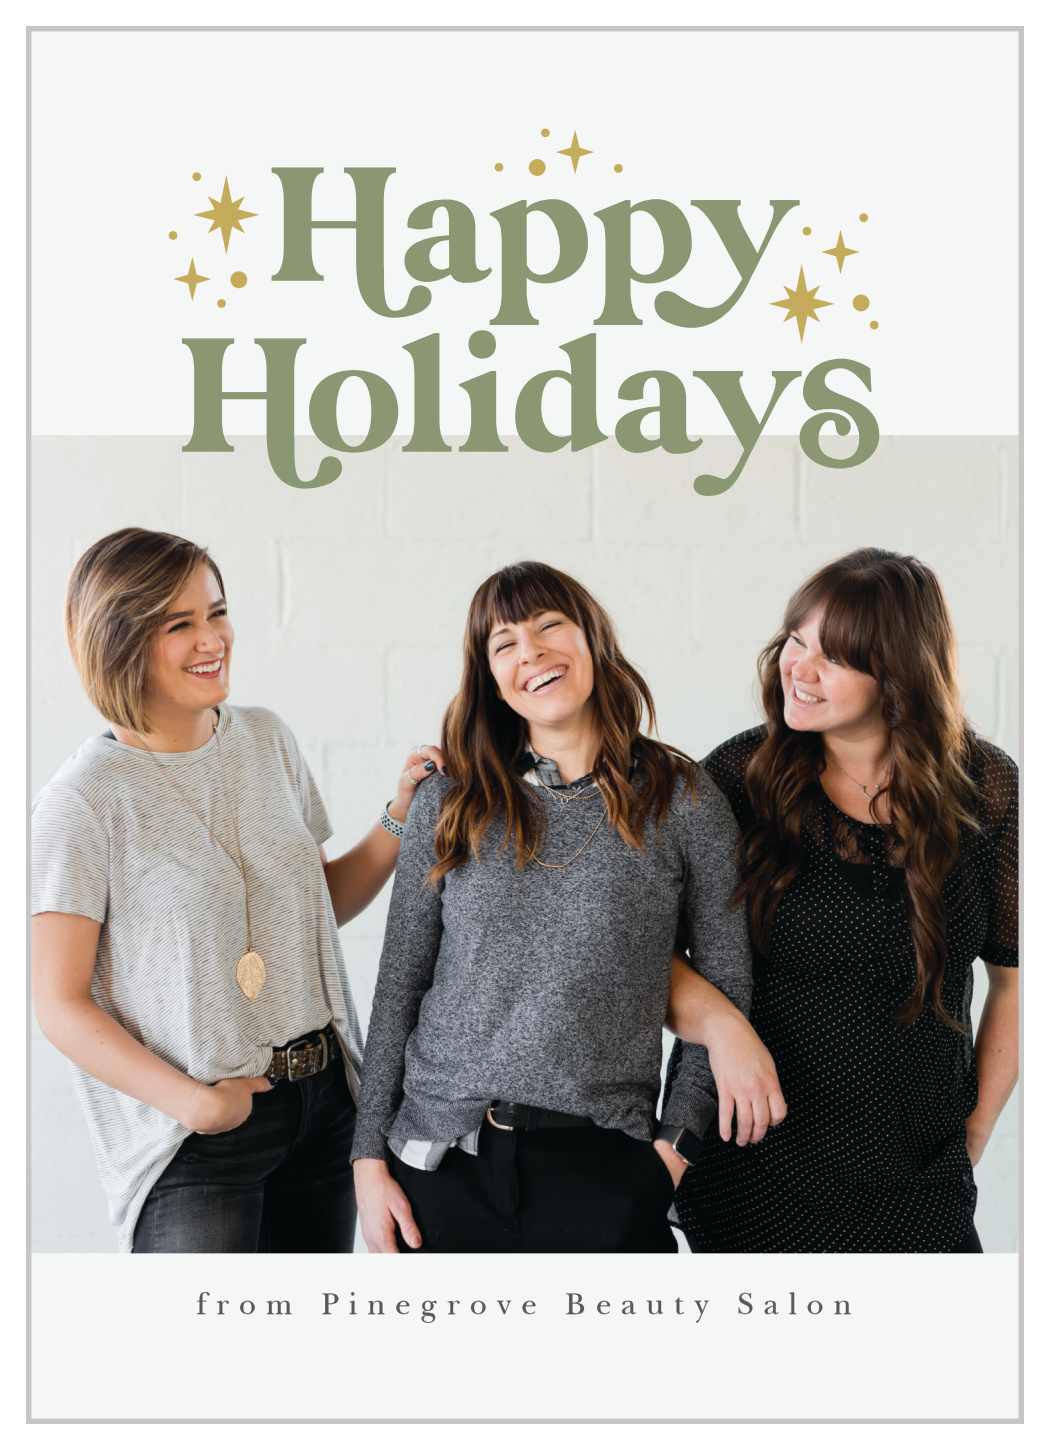 Great Gratitude Corporate Holiday Cards